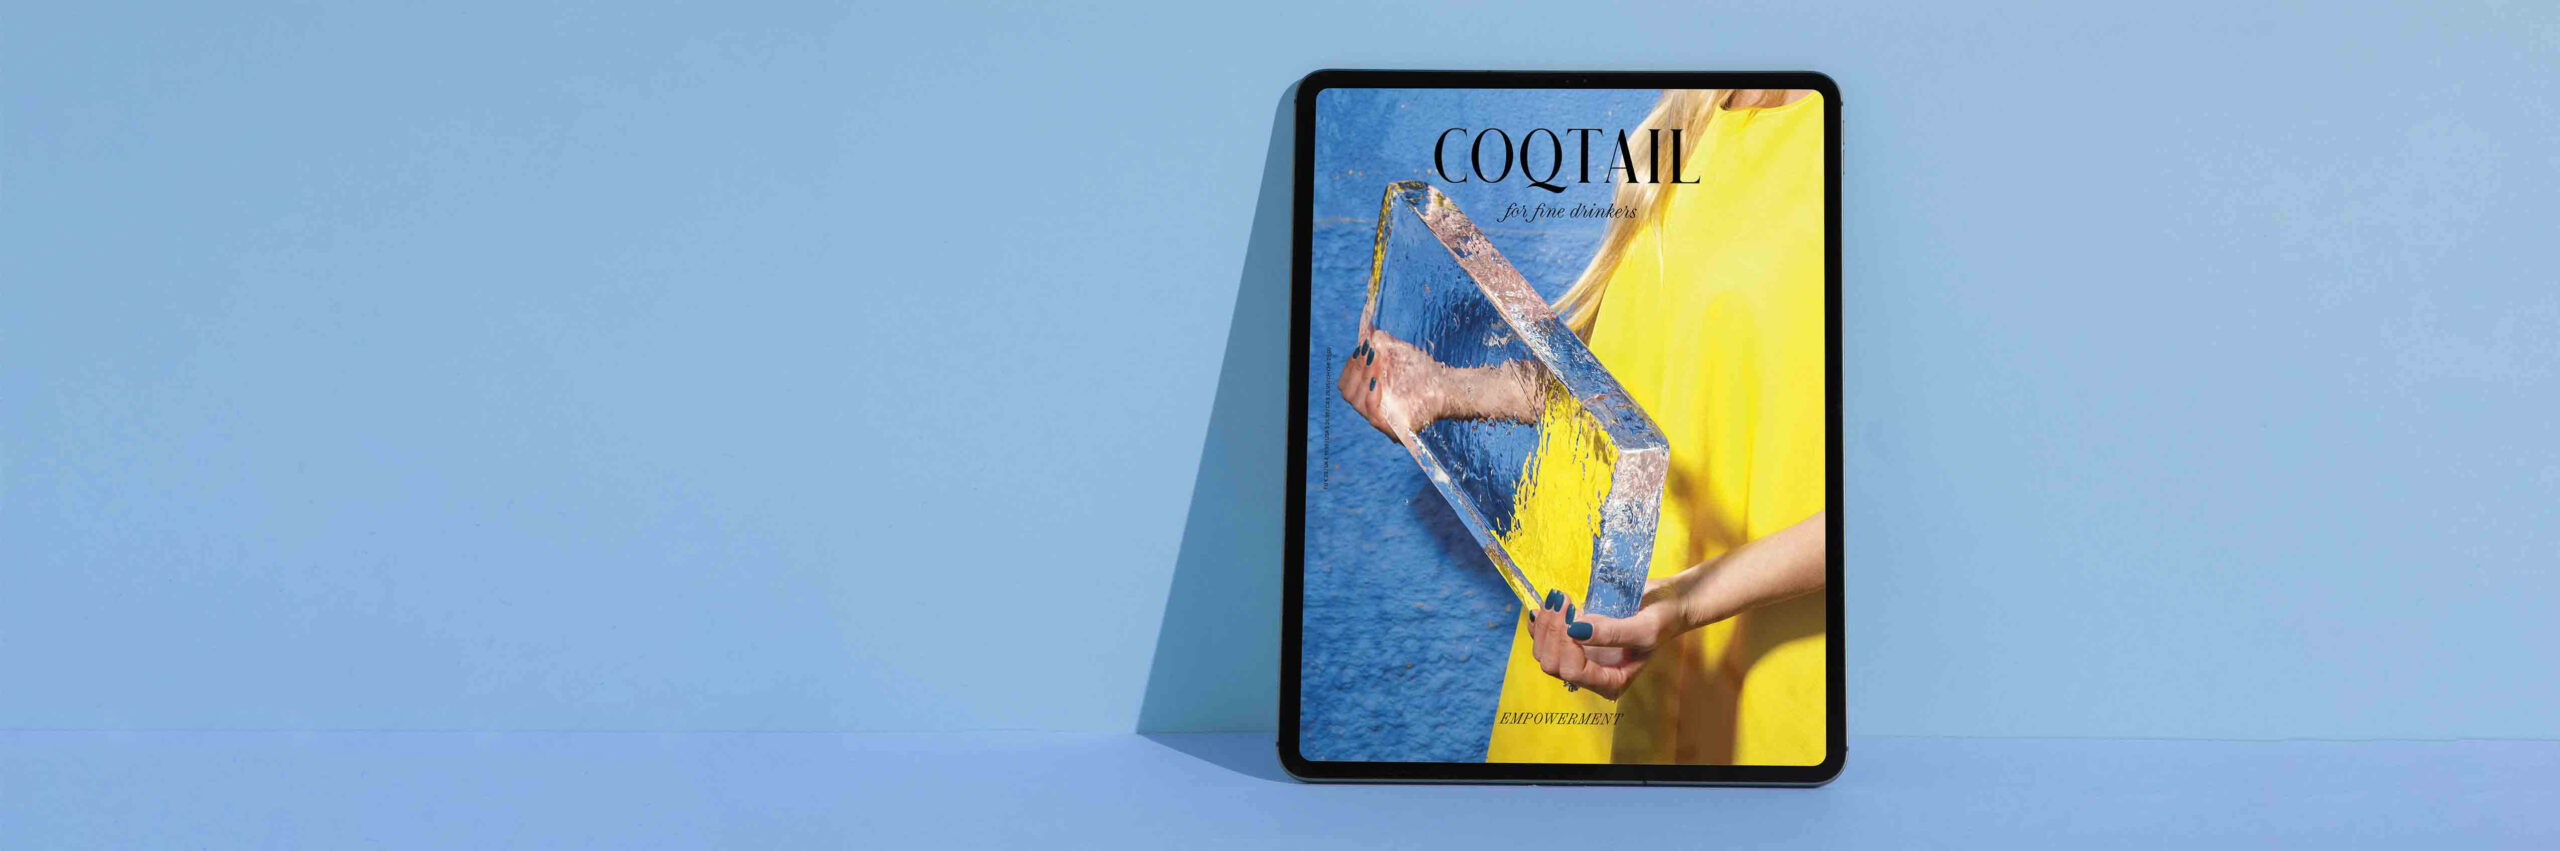 coqtail-for-fine-drinkers-numero-1-digital